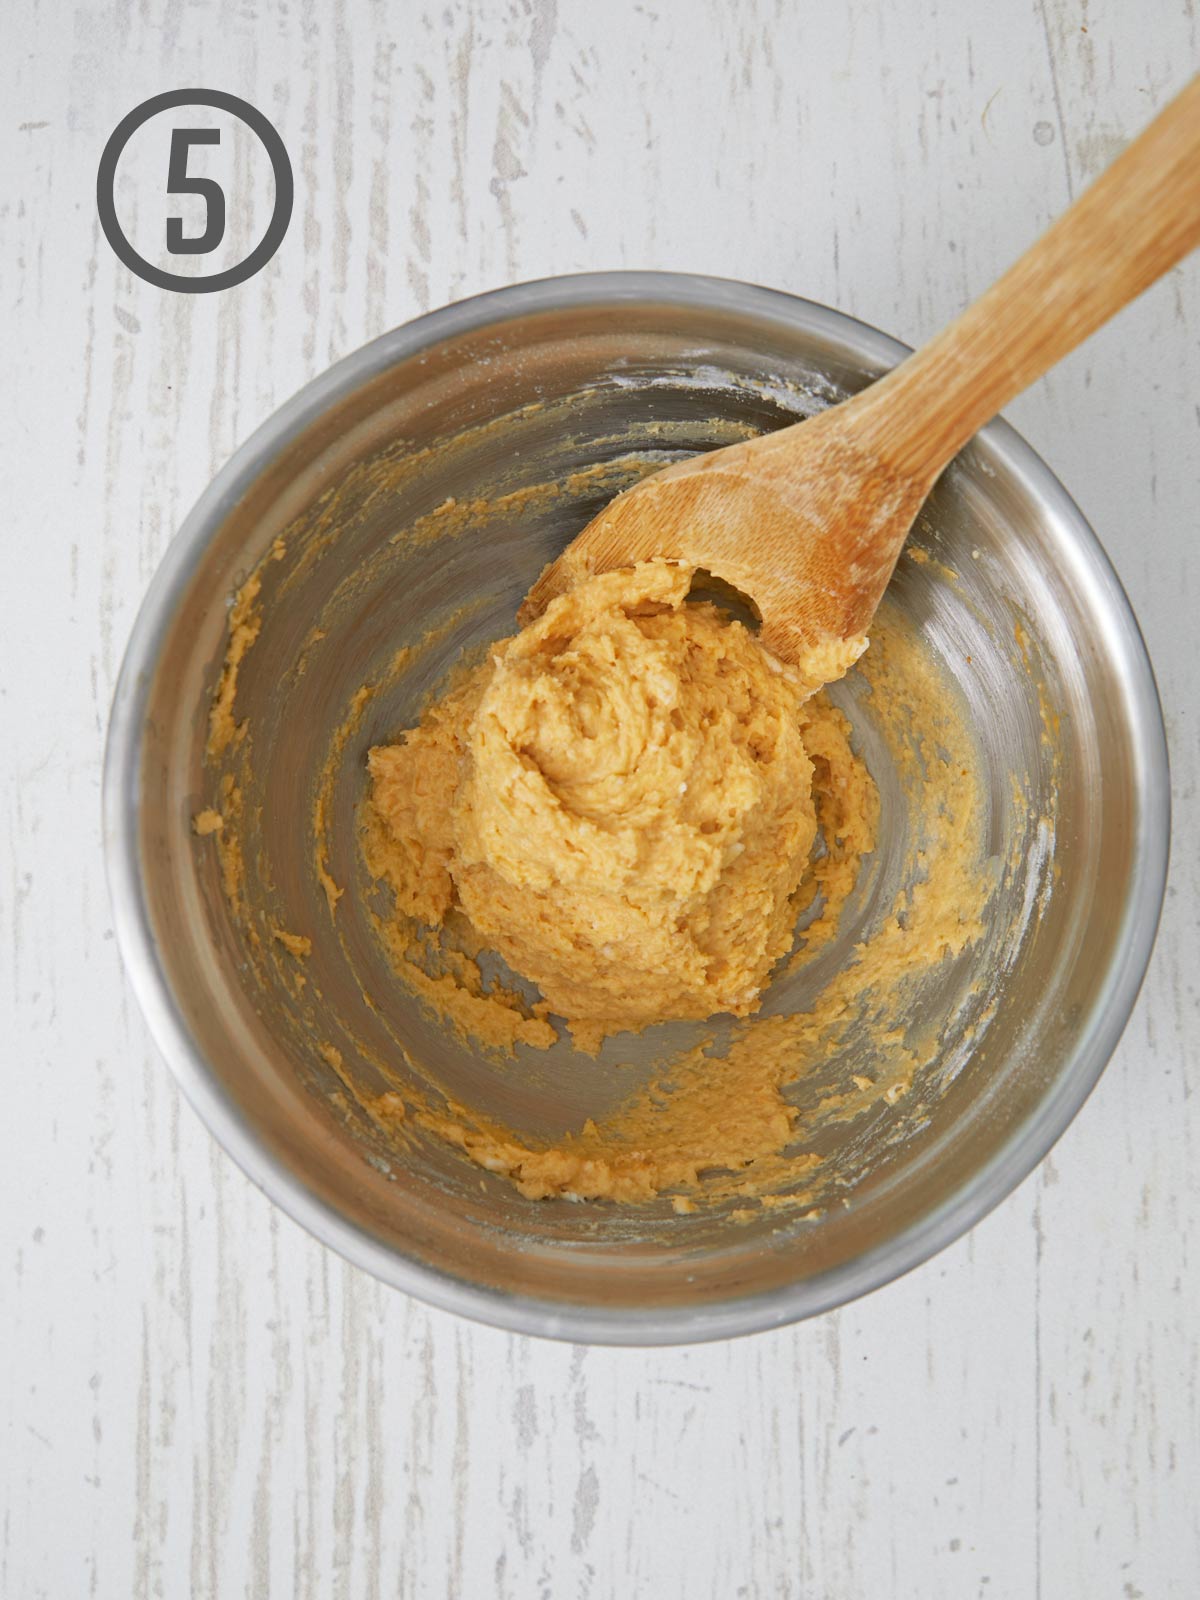 A wooden spoon is used to mix the ingredients in a pumpkin dinner rolls recipe.